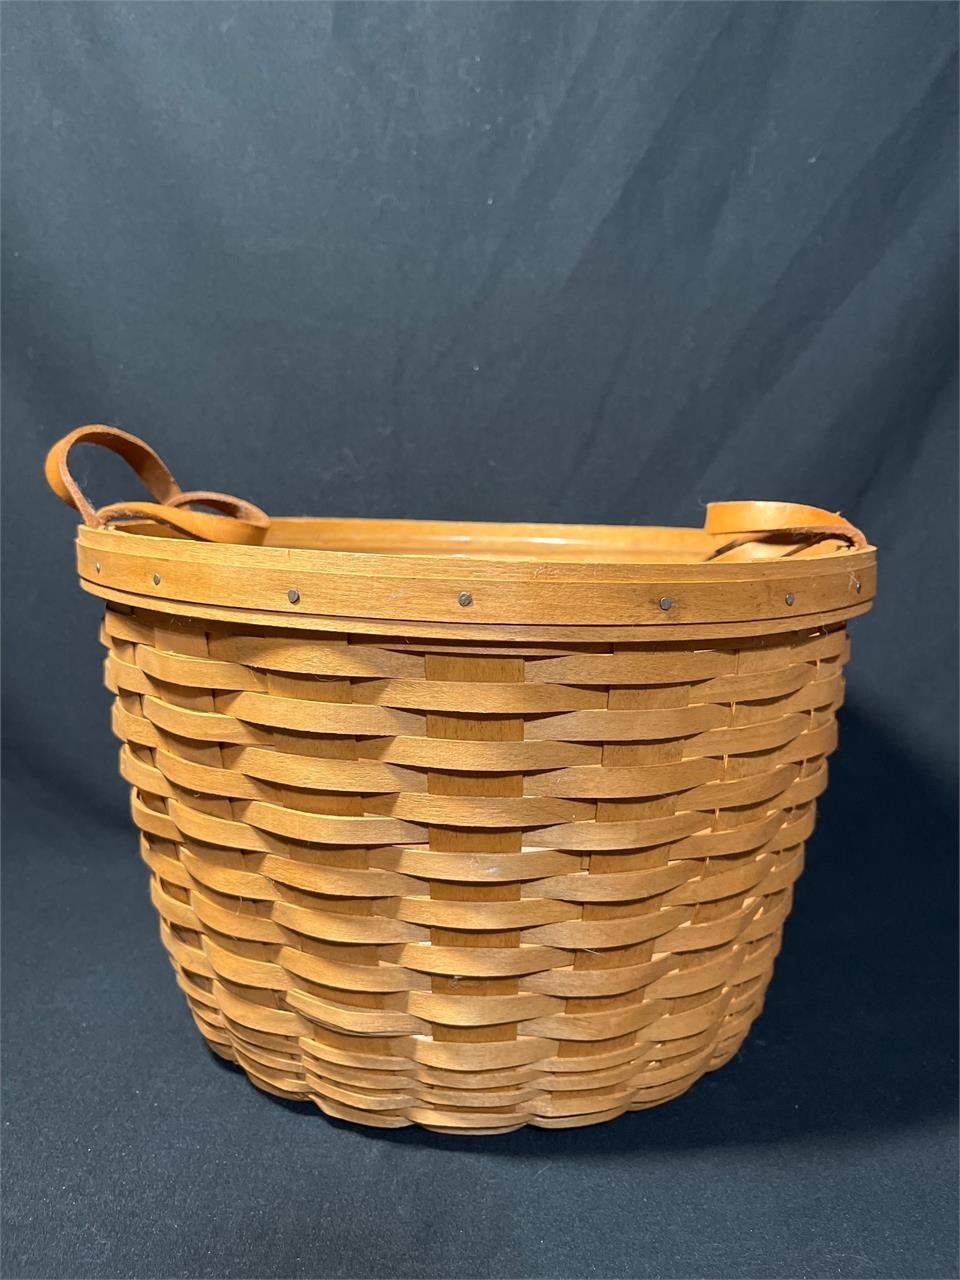 Longaberger round Basket with leather handles.